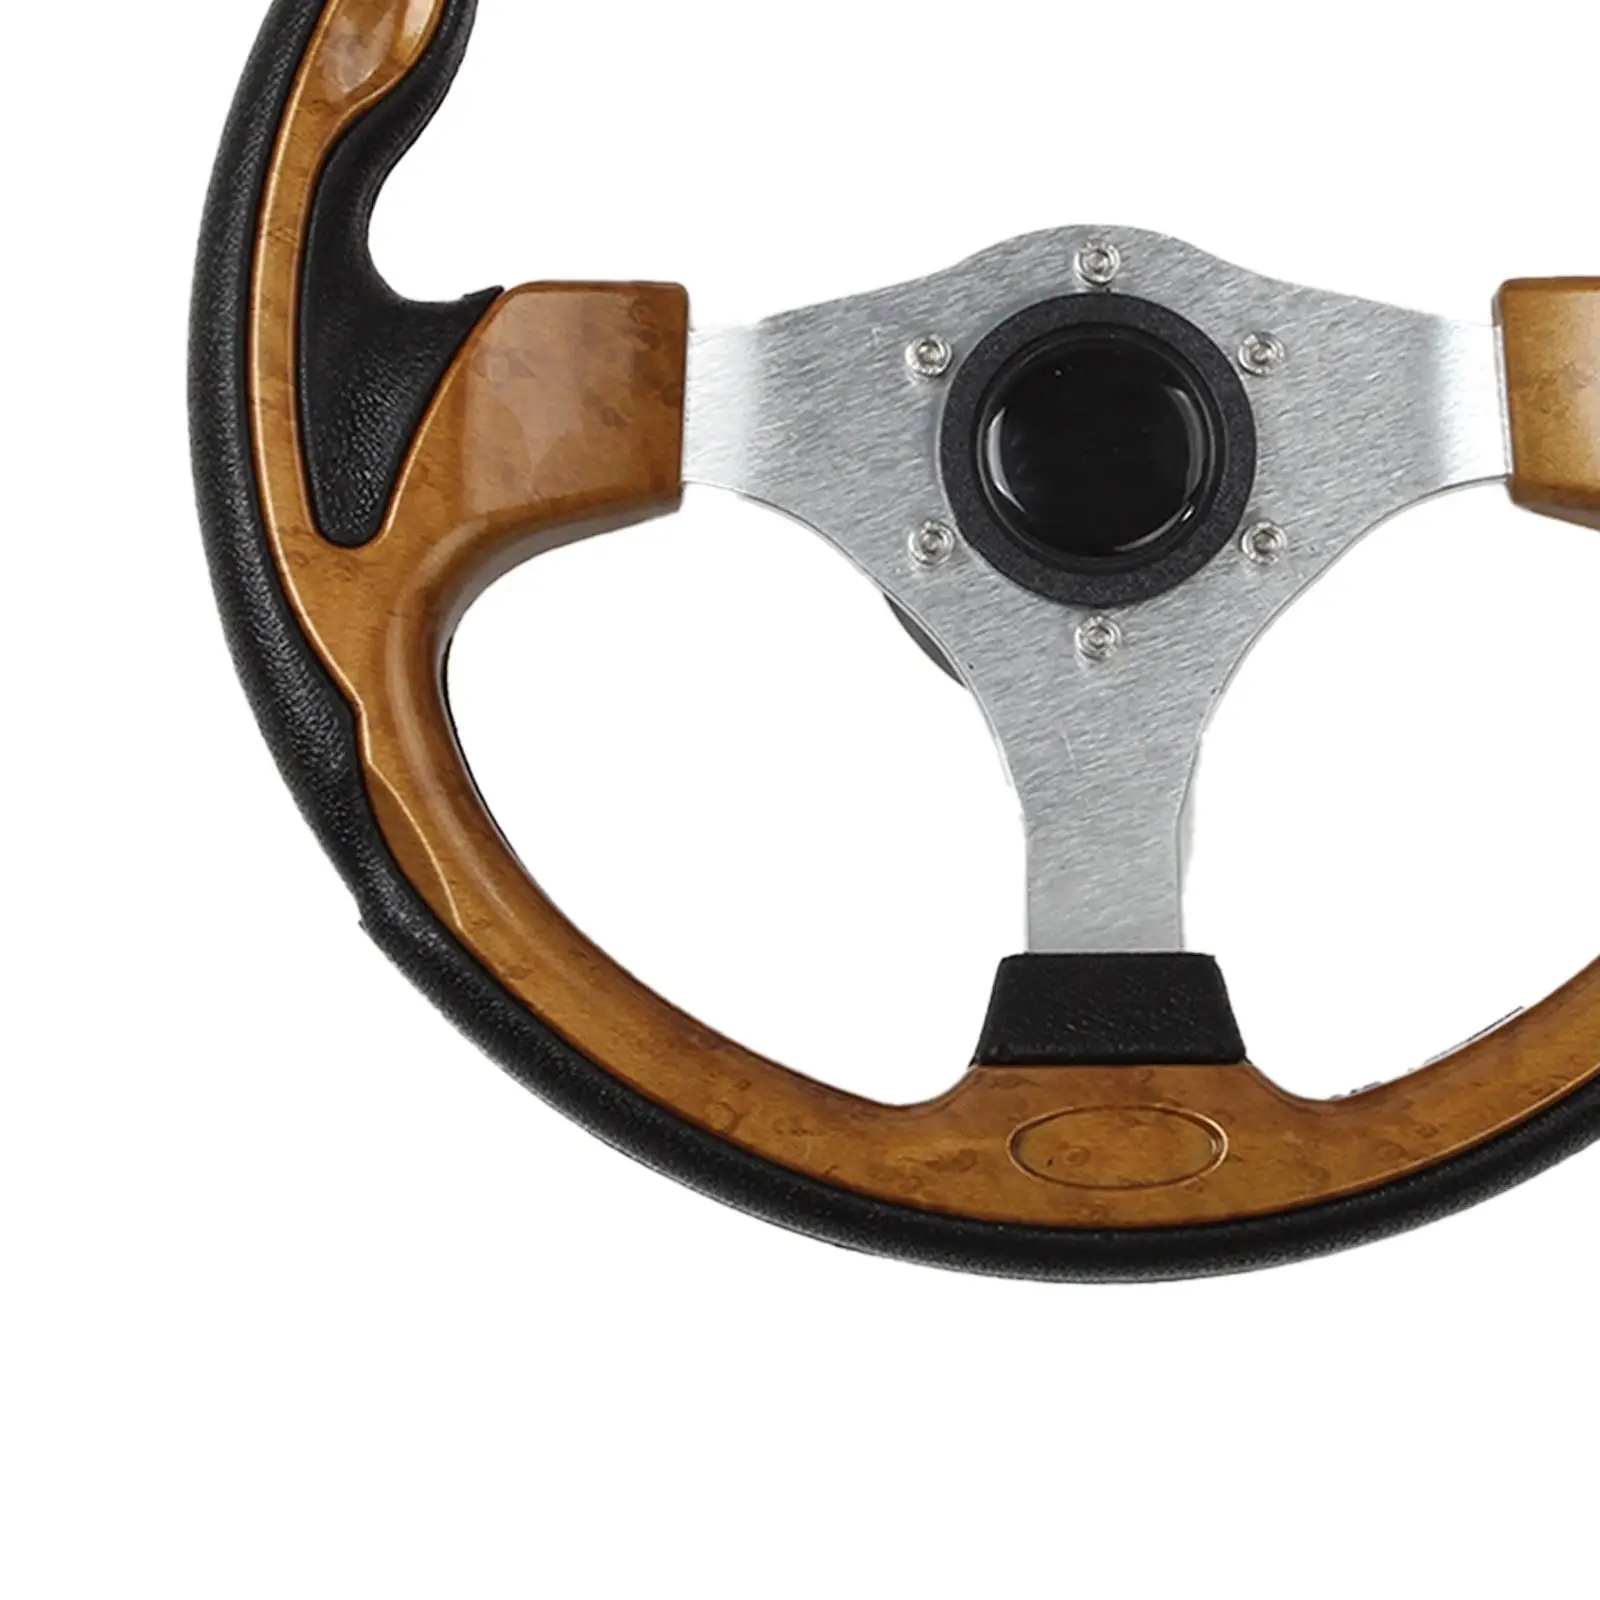 Marine Steering Wheel Easily Install Polished Marine Steering System 350mm for Marine Boats Pontoon Boats Vessels Fittings